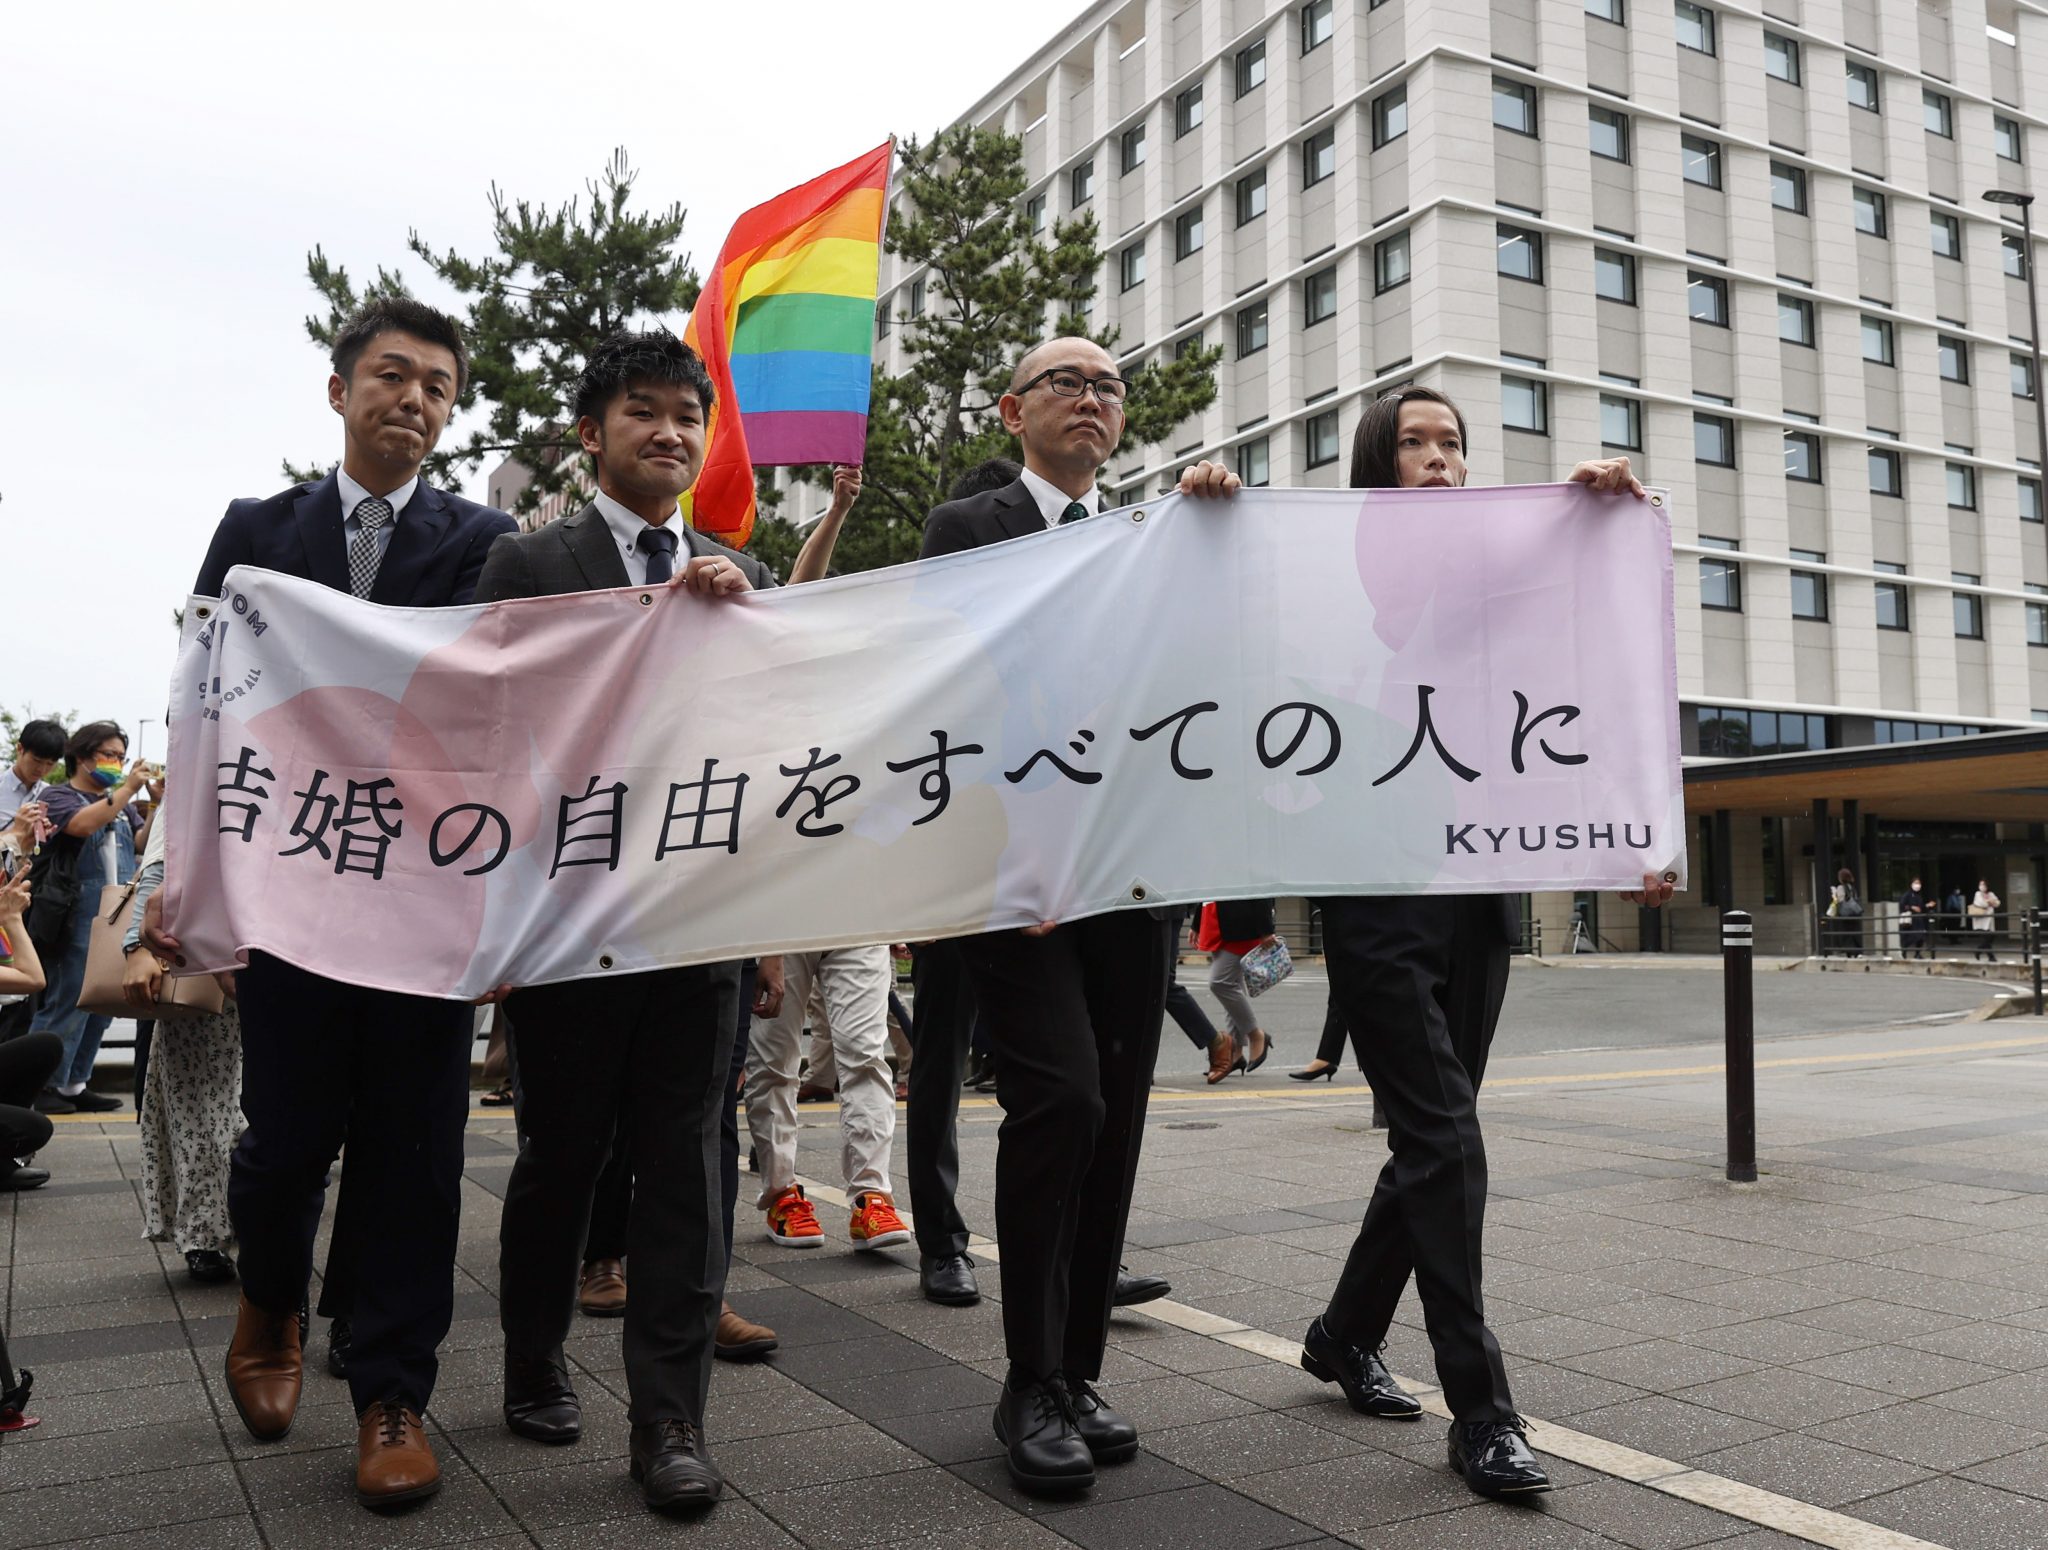 Japans religious right resists marriage equality East Asia Forum